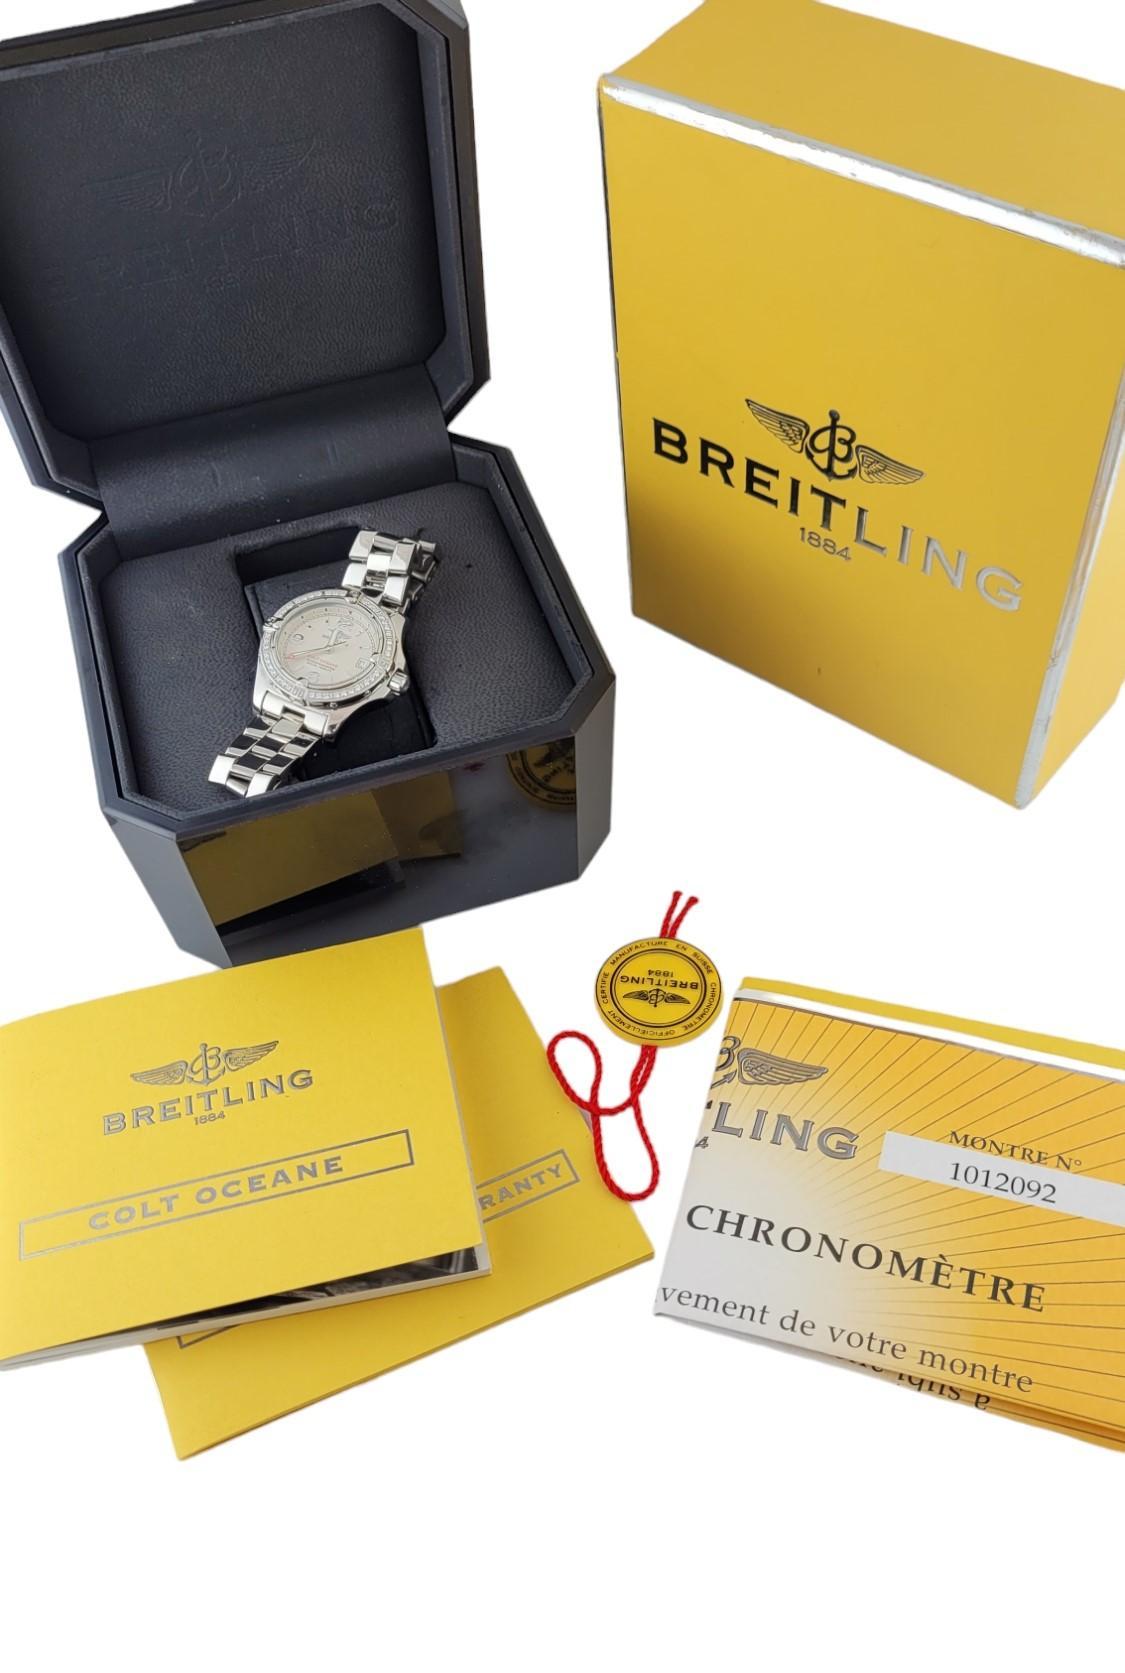 2007 Breitling Ladies Colt Oceane Diamond Watch A77380 Box/Papers # 17227 For Sale 6